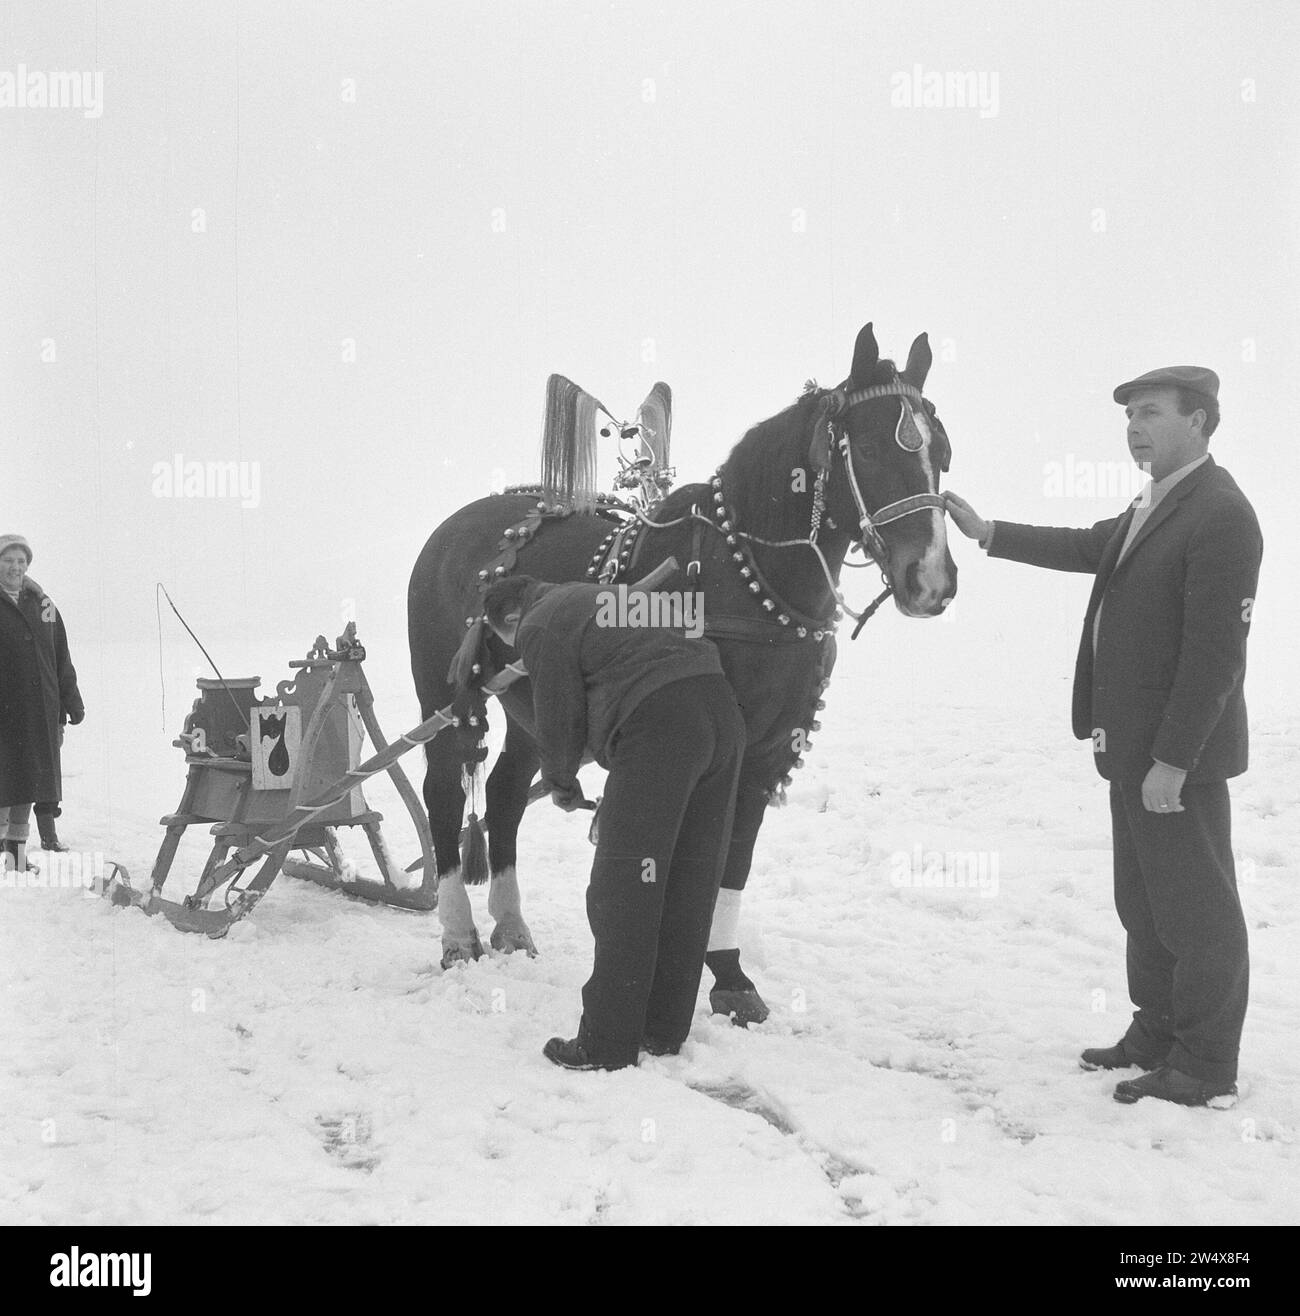 New Year's Eve in Akkrum harness racing , Poelsma with Johnny from Leeuwarden ca. January 6, 1963 Stock Photo